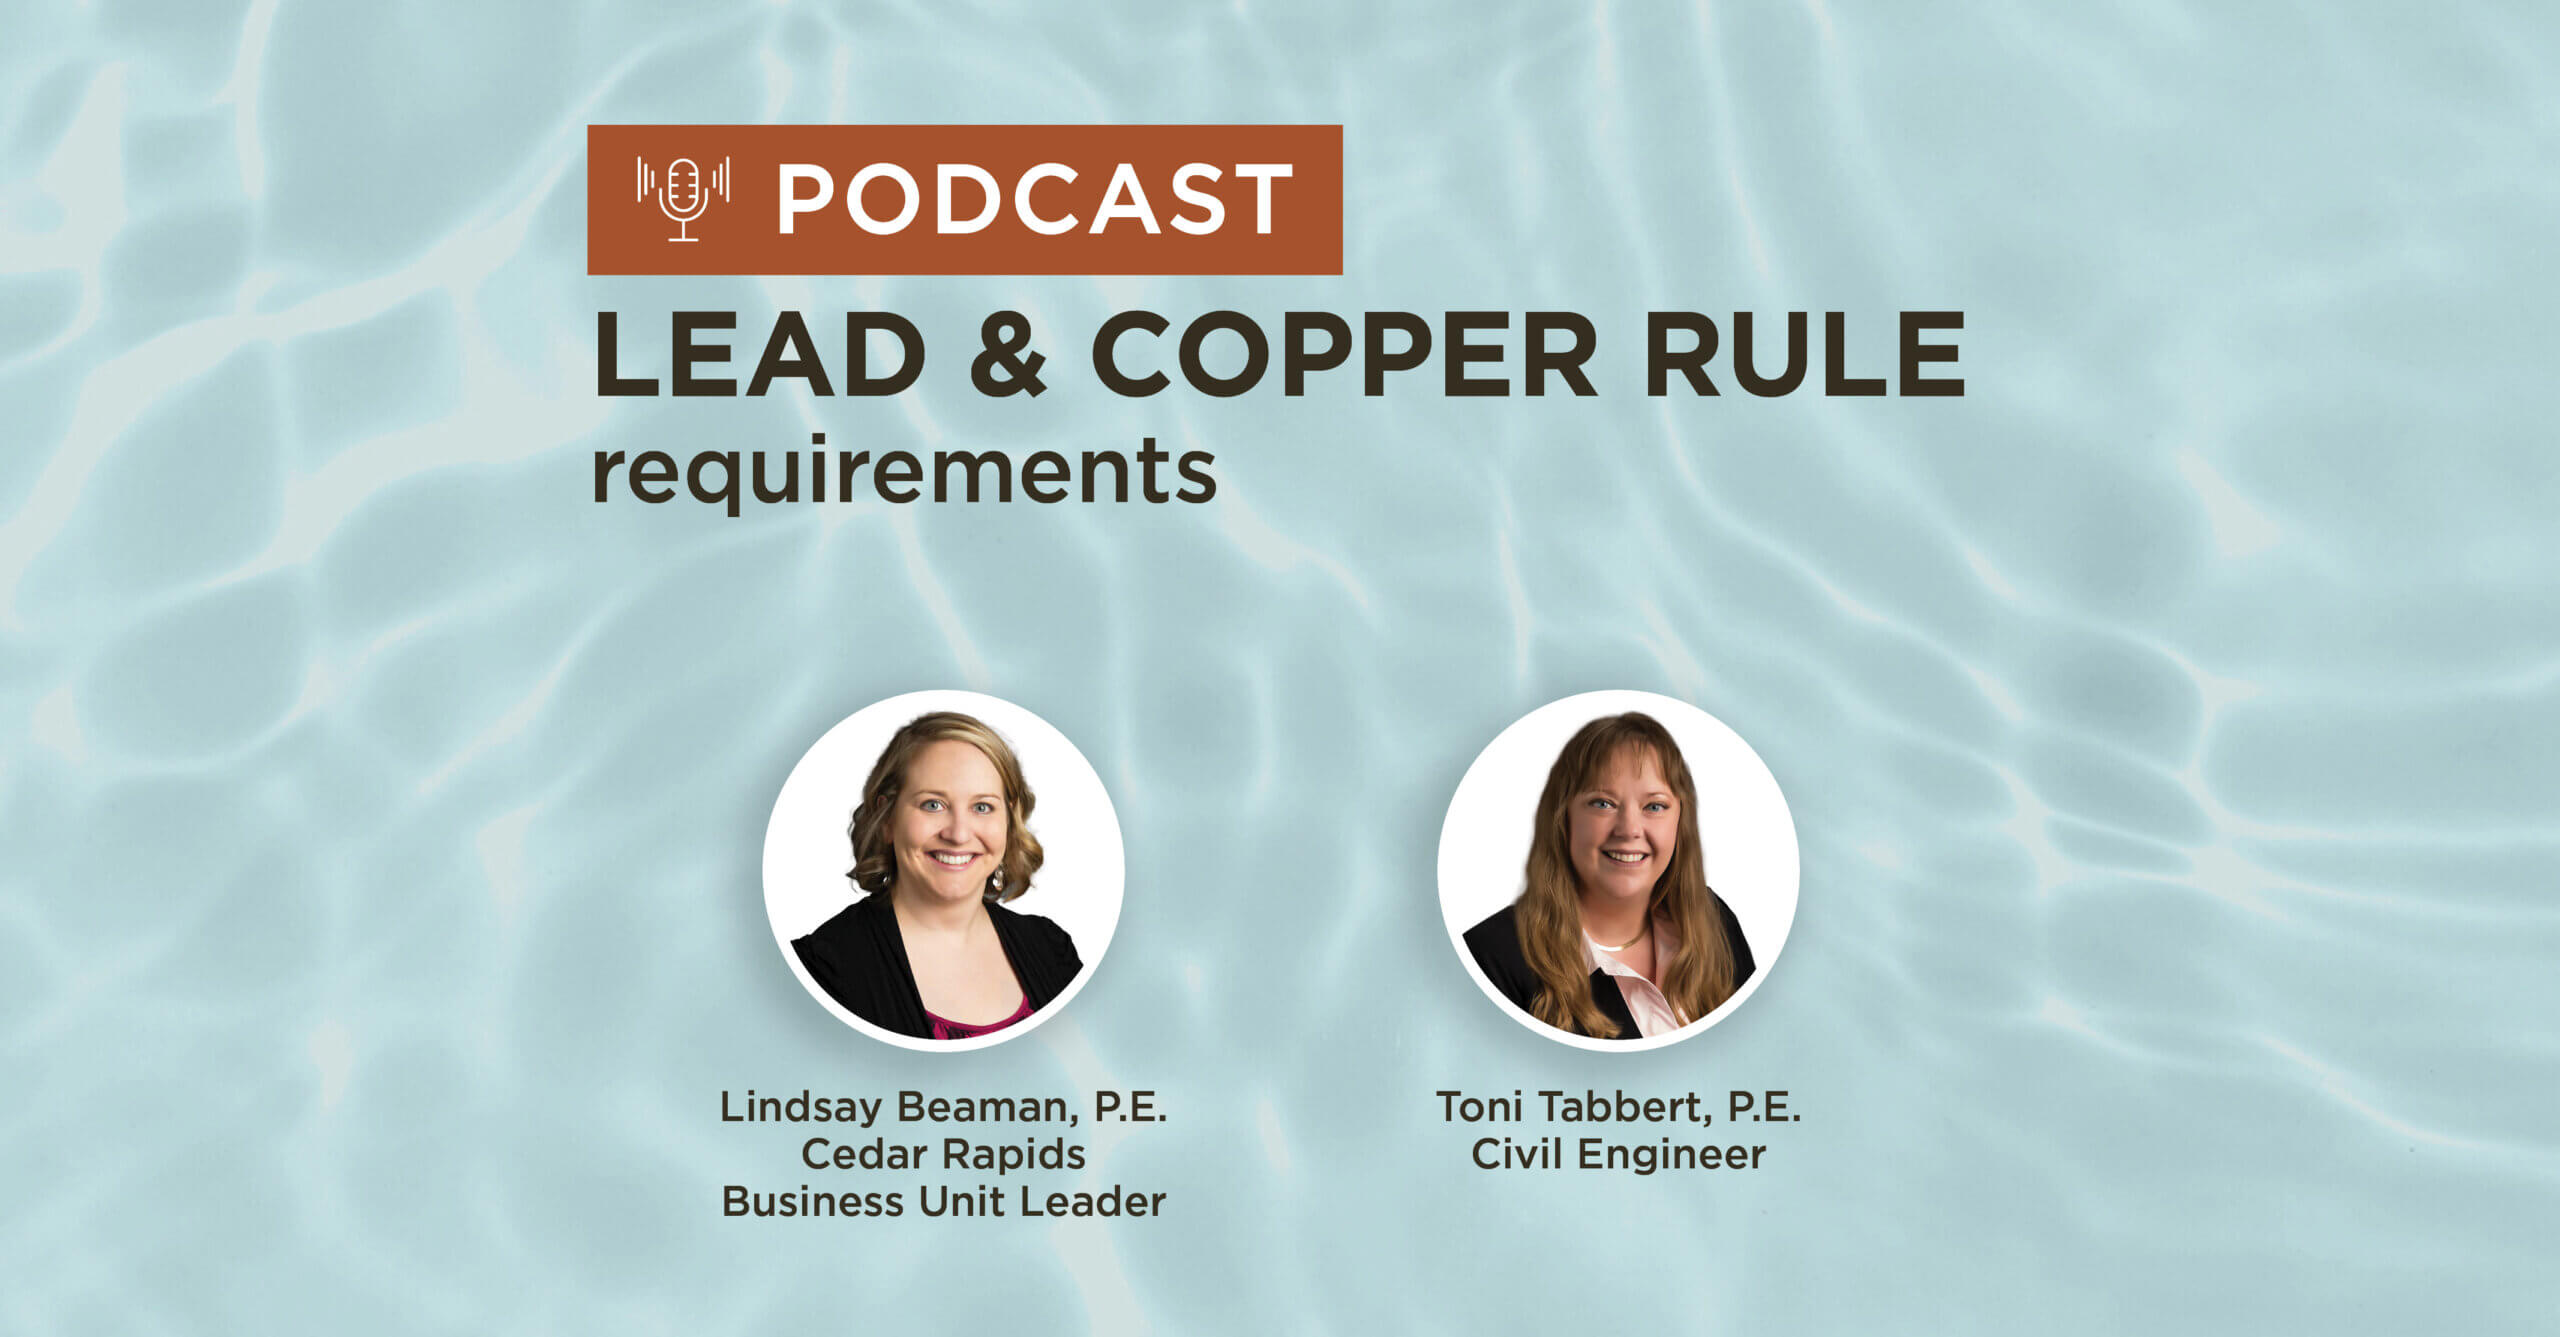 Lead and Copper Rule requirements podcast graphic featuring Lindsay Beaman, P.E., and Toni Tabbert, P.E.